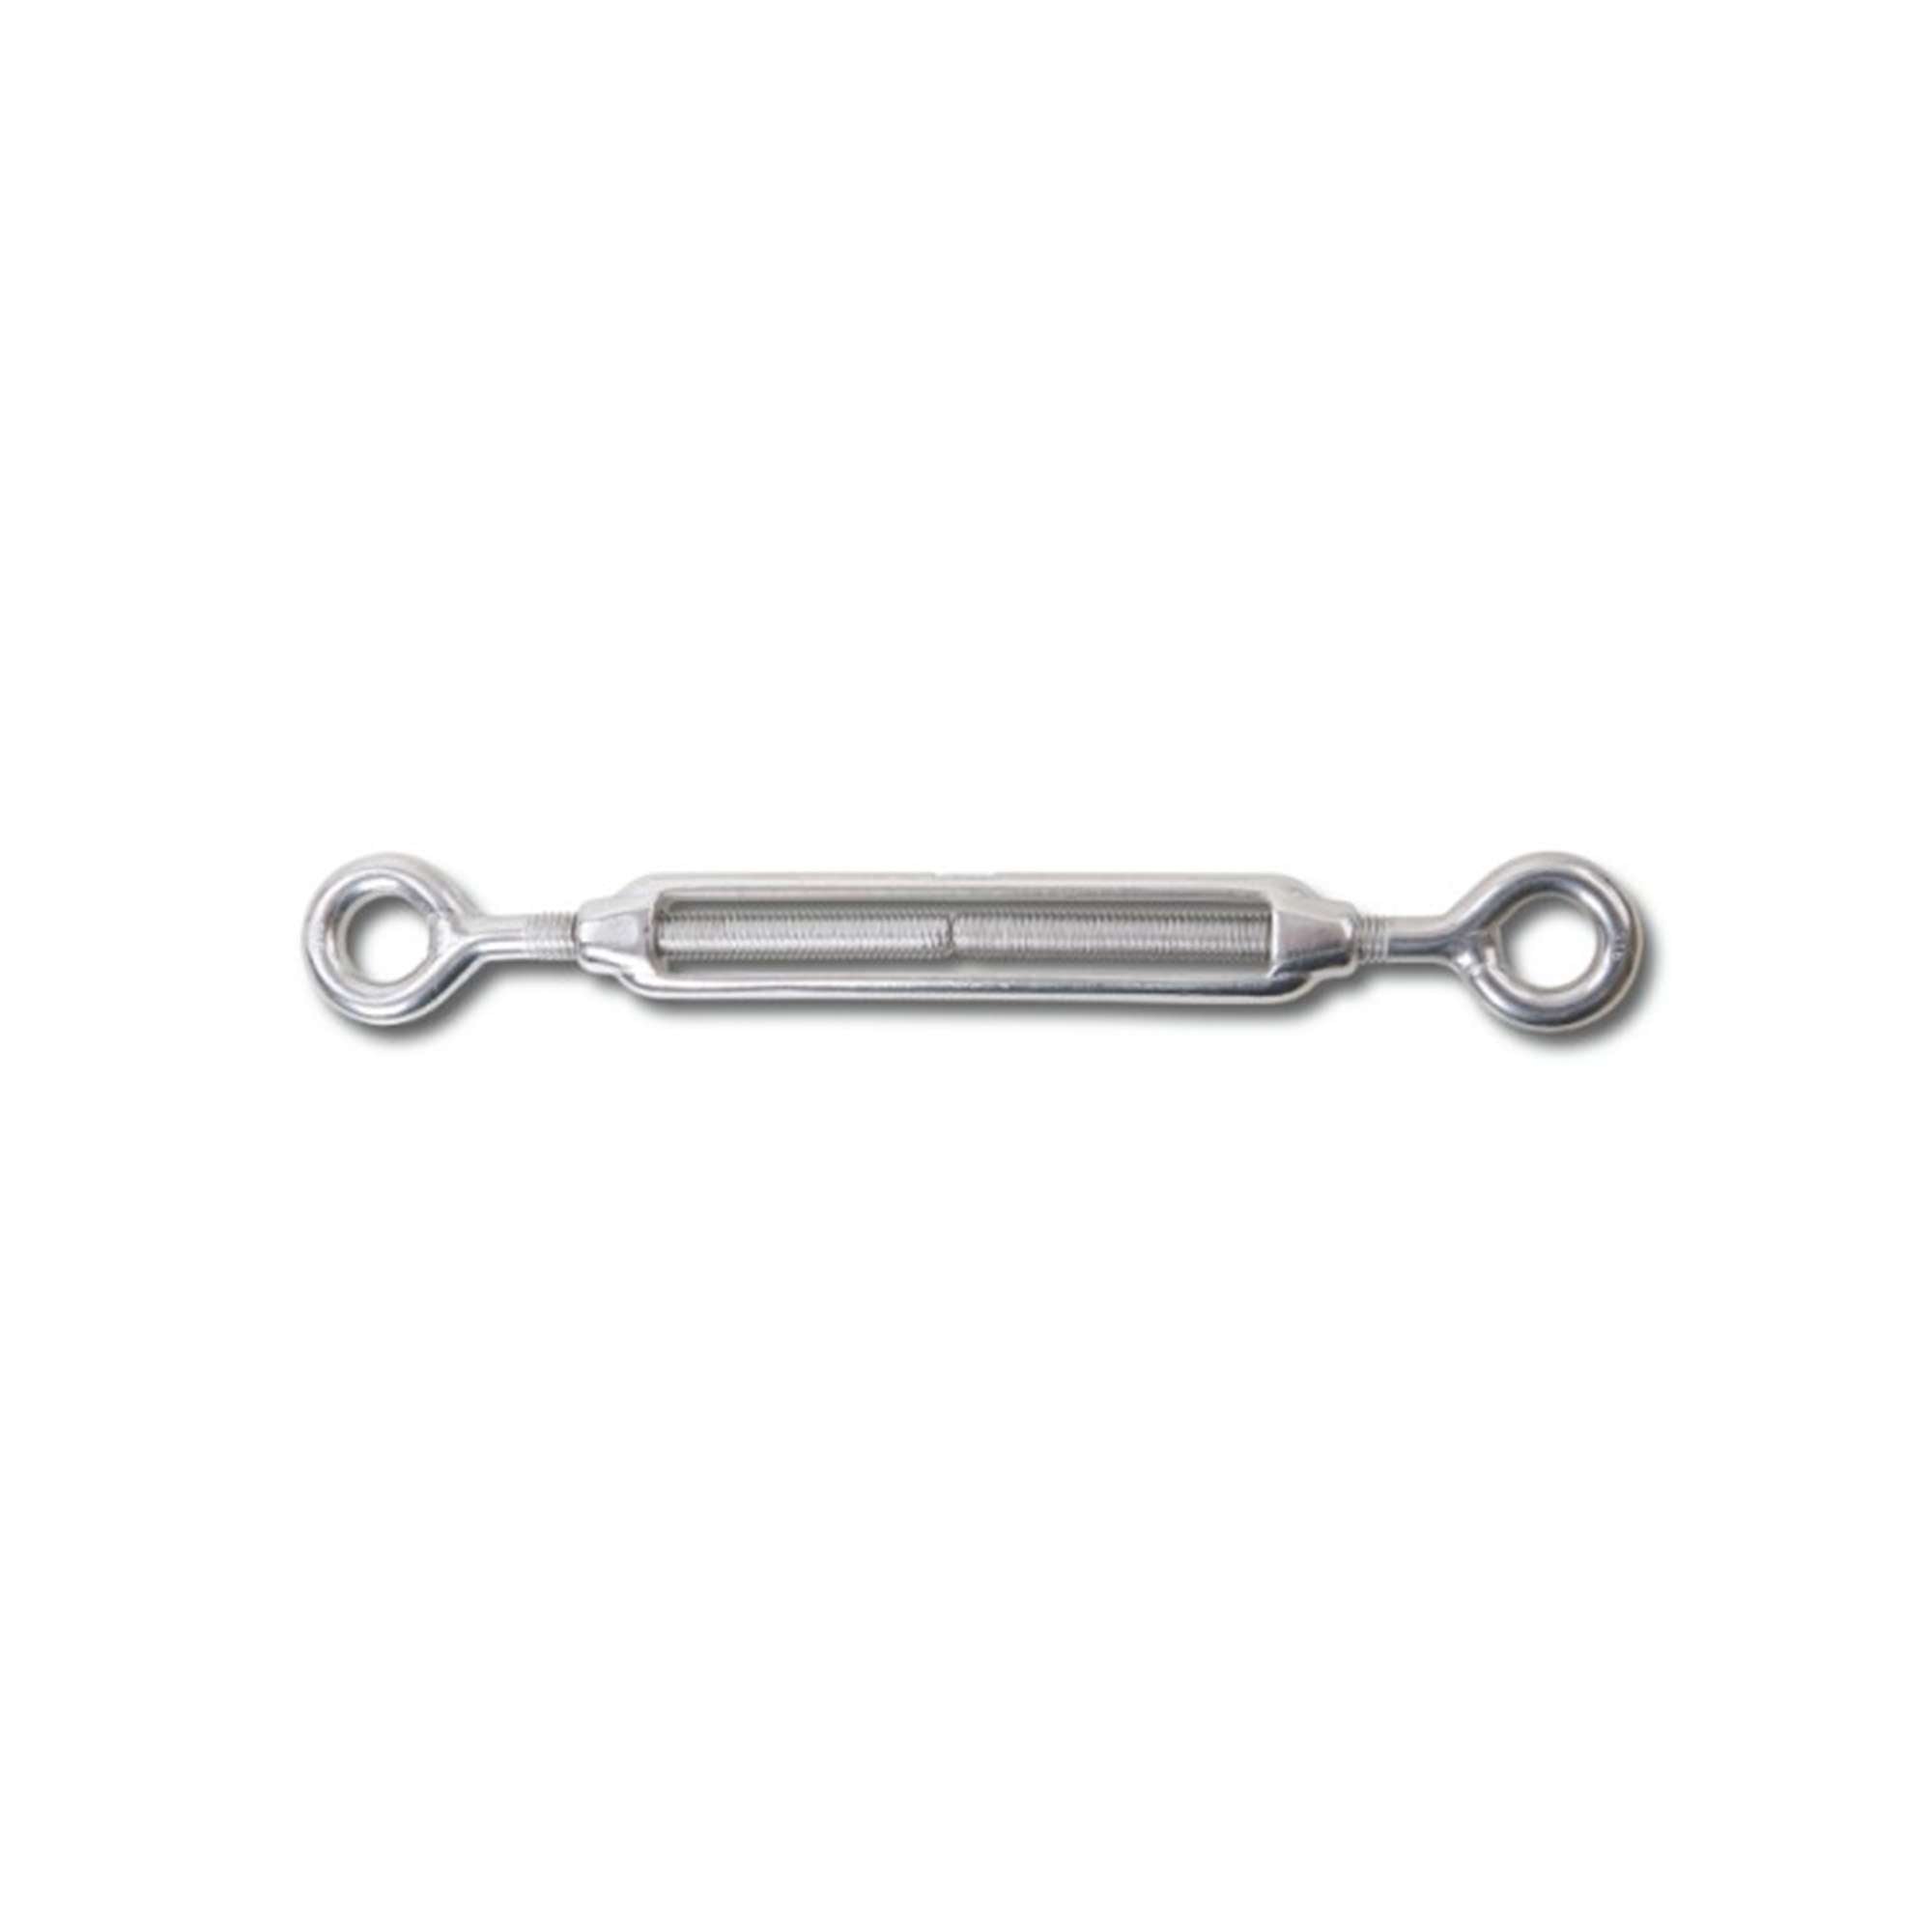 Two-eye turnbuckle stainless steel AISI 316 - Beta 8205